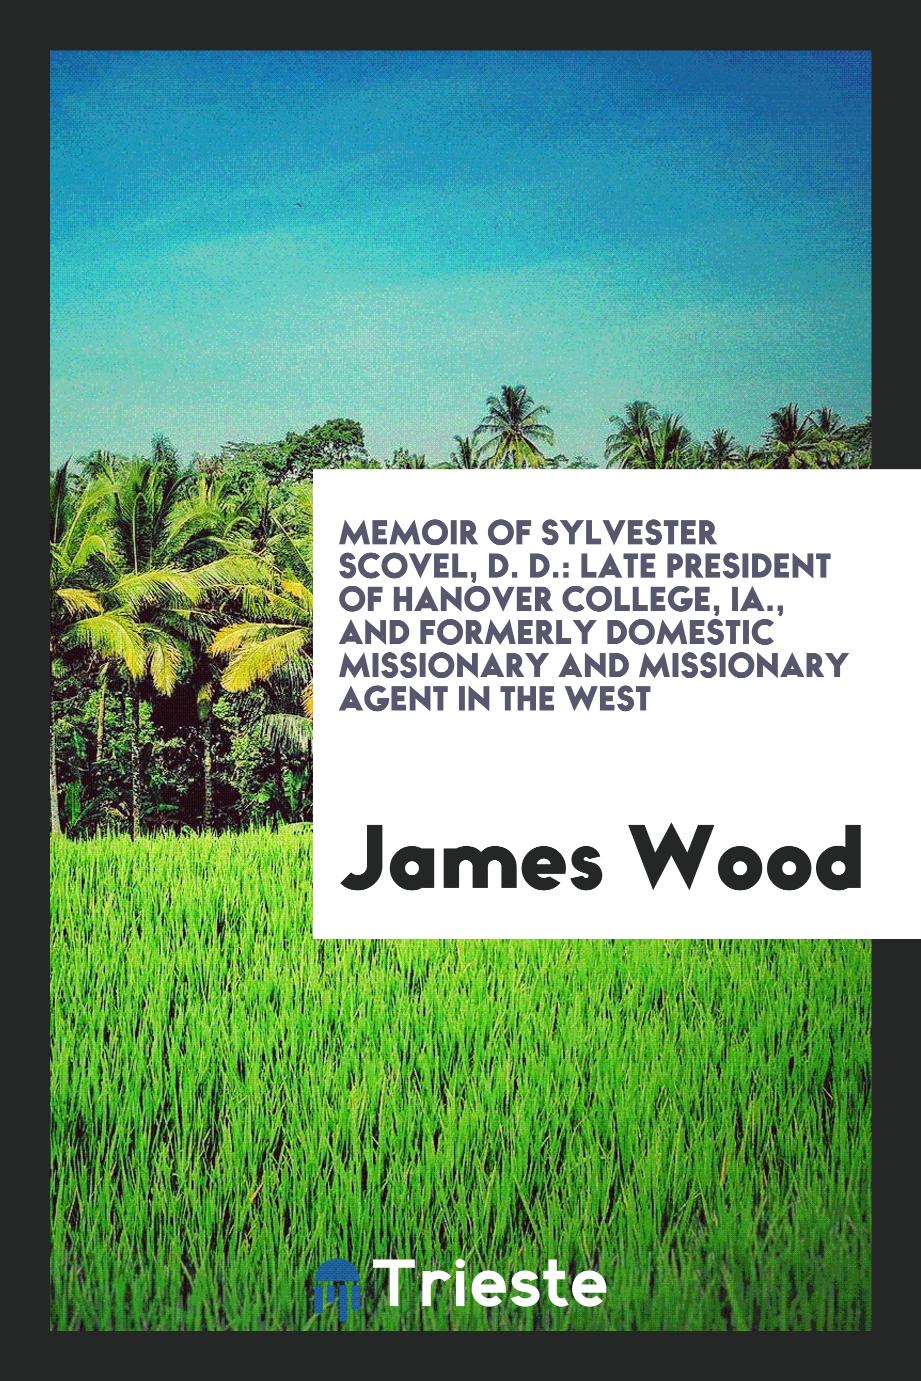 Memoir of Sylvester Scovel, D. D.: late president of Hanover college, Ia., and formerly domestic missionary and missionary agent in the West